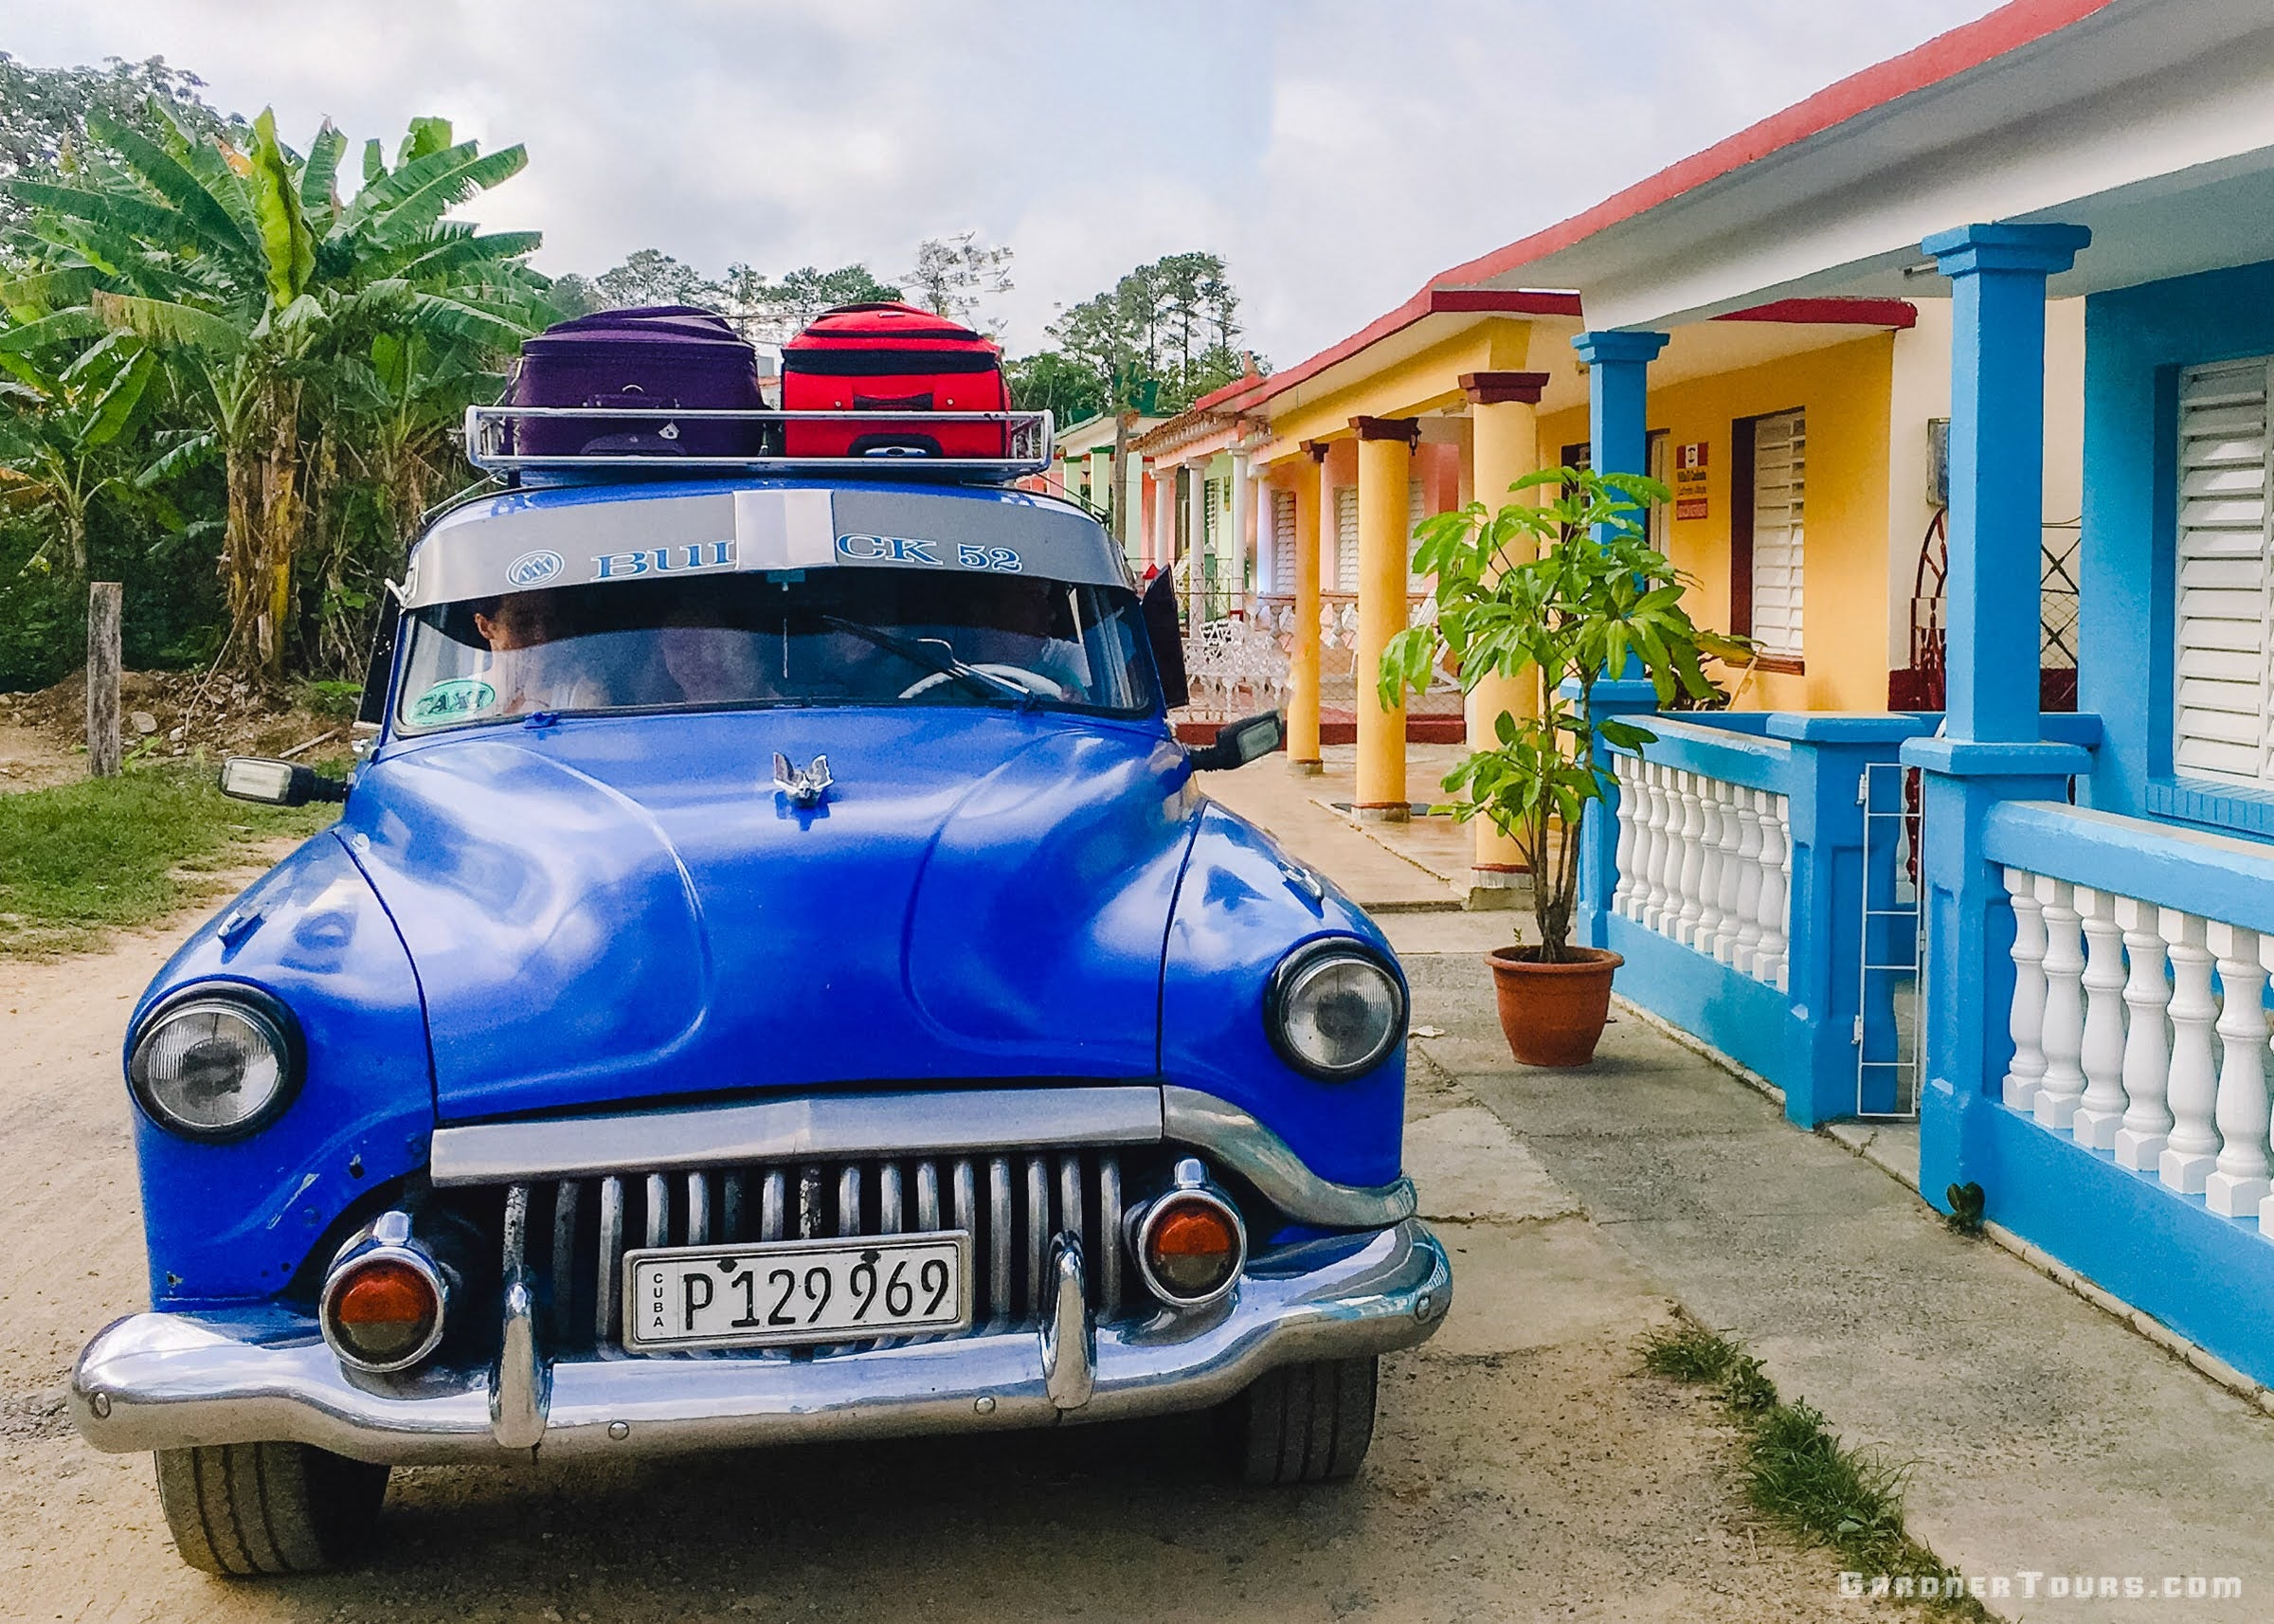 Gardner Tours Blue Buick Classic Car with Luggage on Top sitting outside of BnB in Vinales Cuba